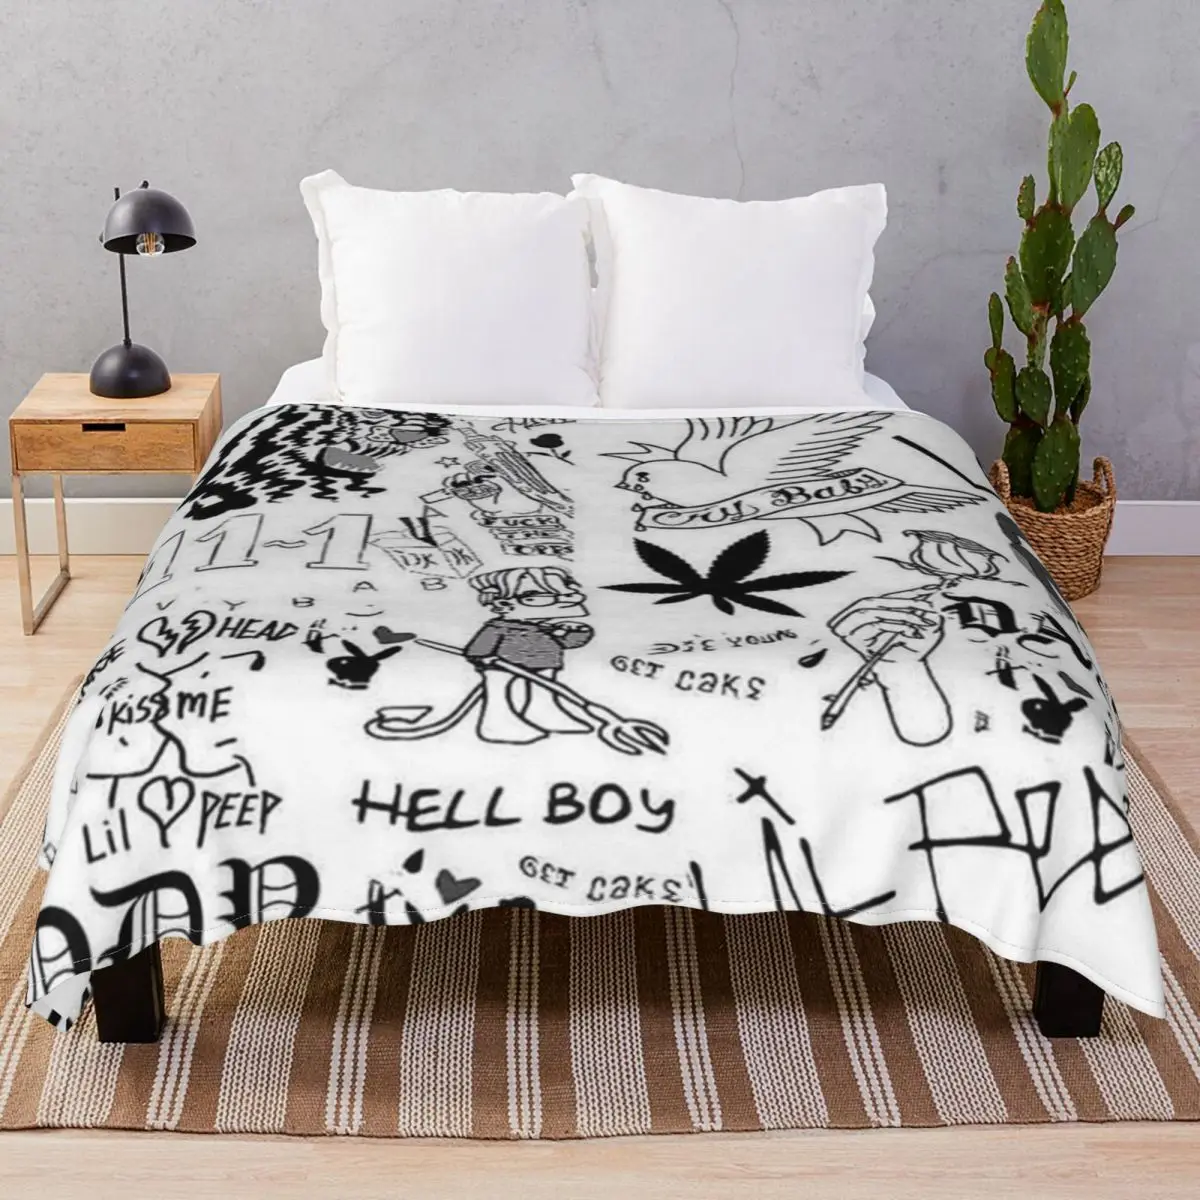 Lil Peep Blanket Flannel Plush Decoration Super Warm Throw Blankets for Bed Home Couch Camp Office